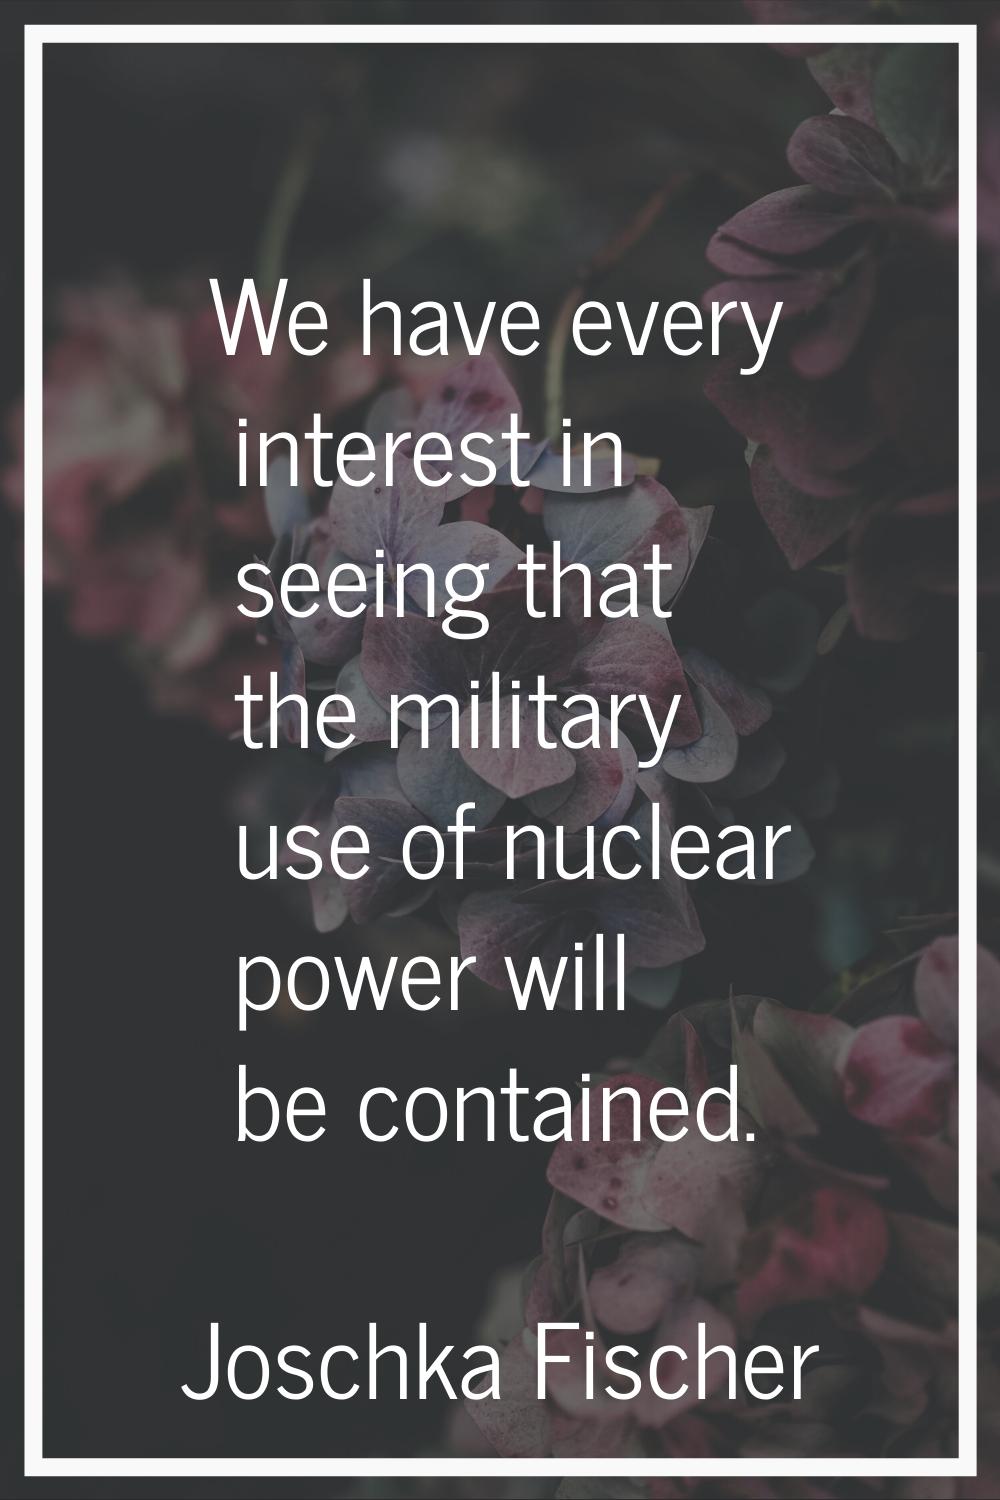 We have every interest in seeing that the military use of nuclear power will be contained.